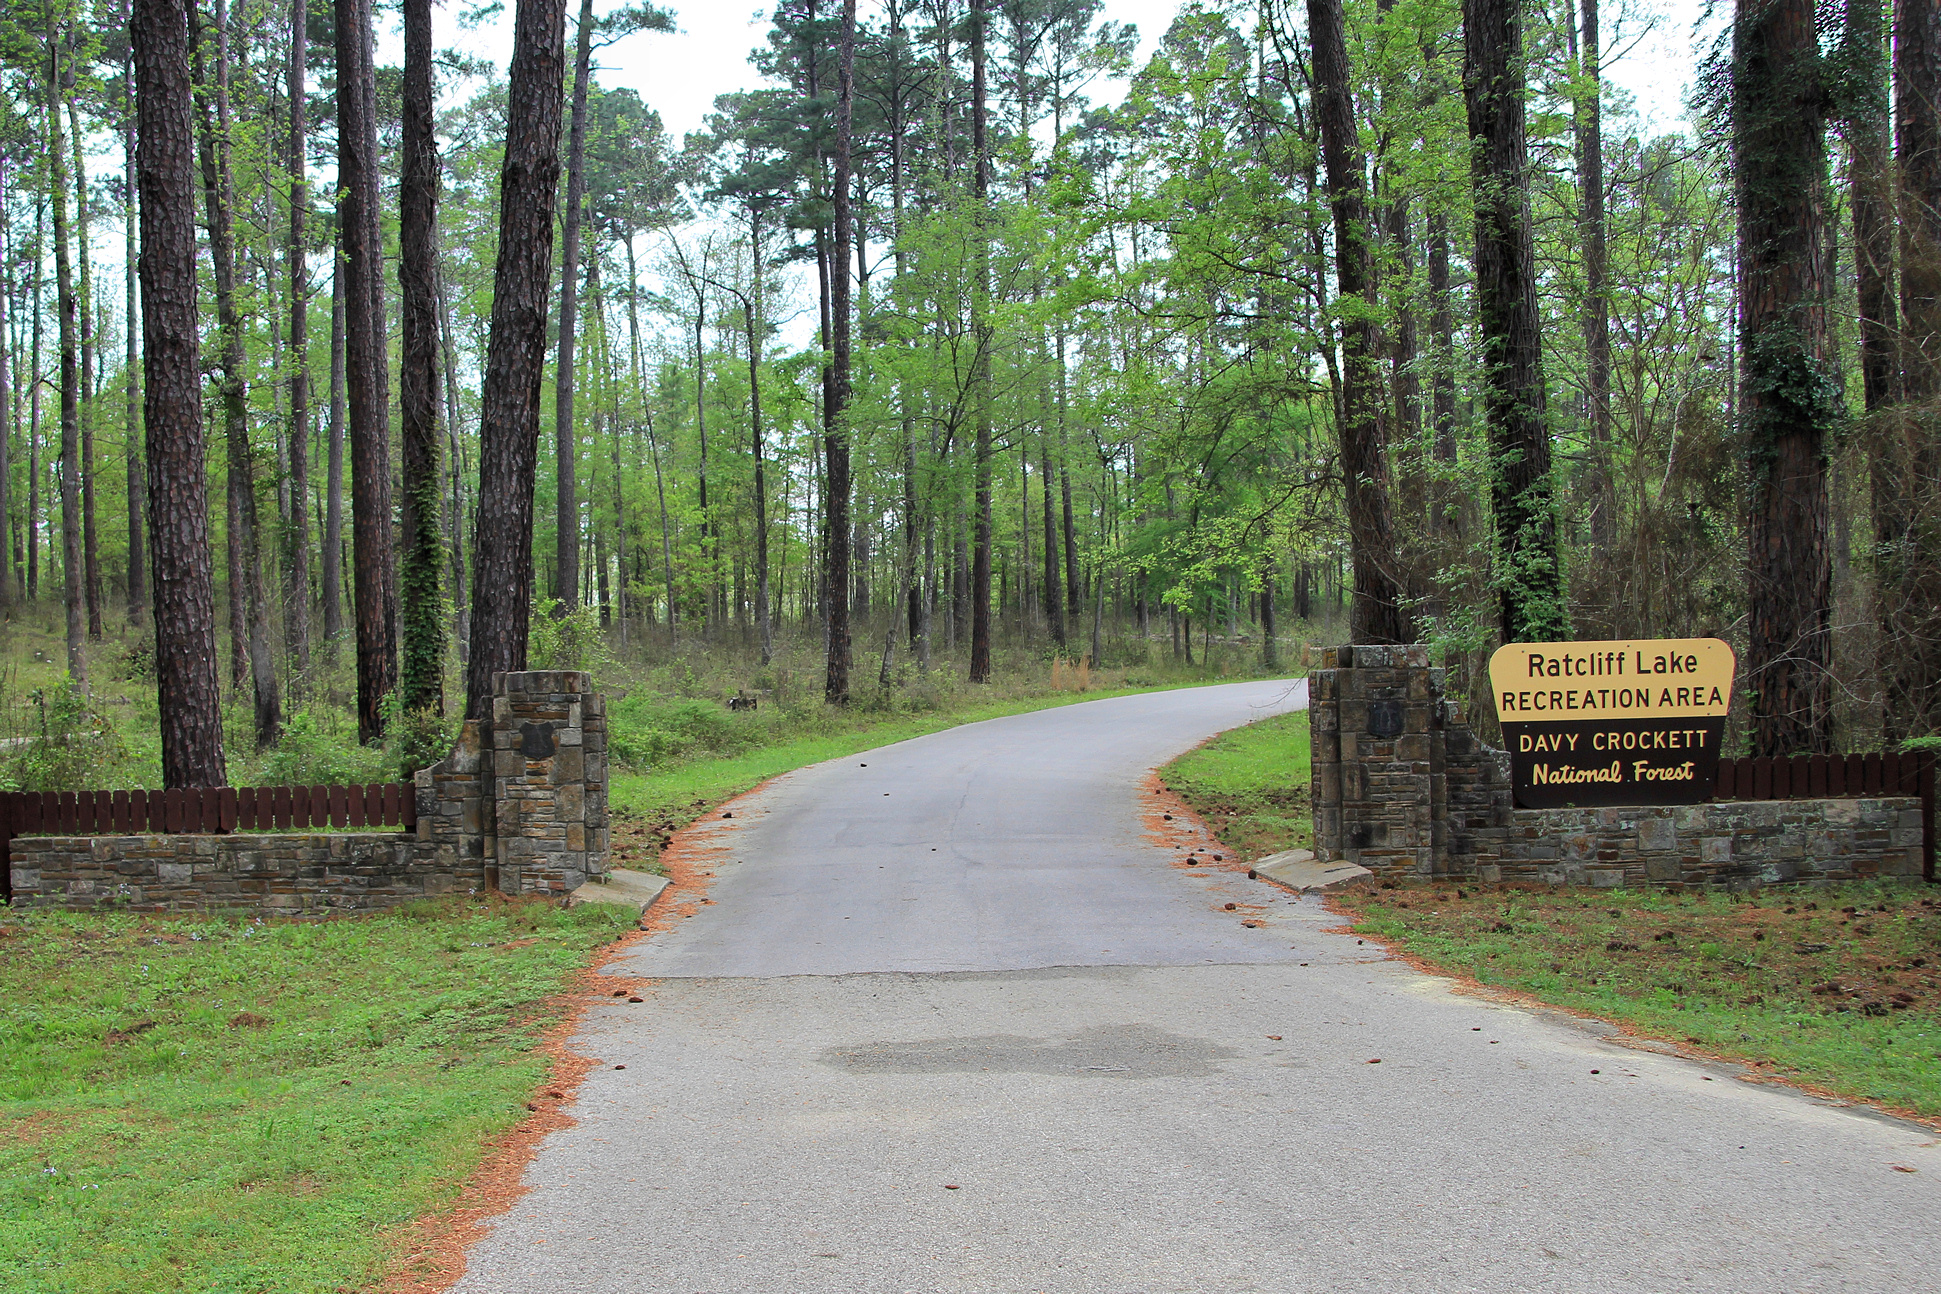 Paved road flanked by stone pillars leading through a forest with a sign on the right reading "Ratcliff Lake Recreation Area, Davy Crockett National Forest.